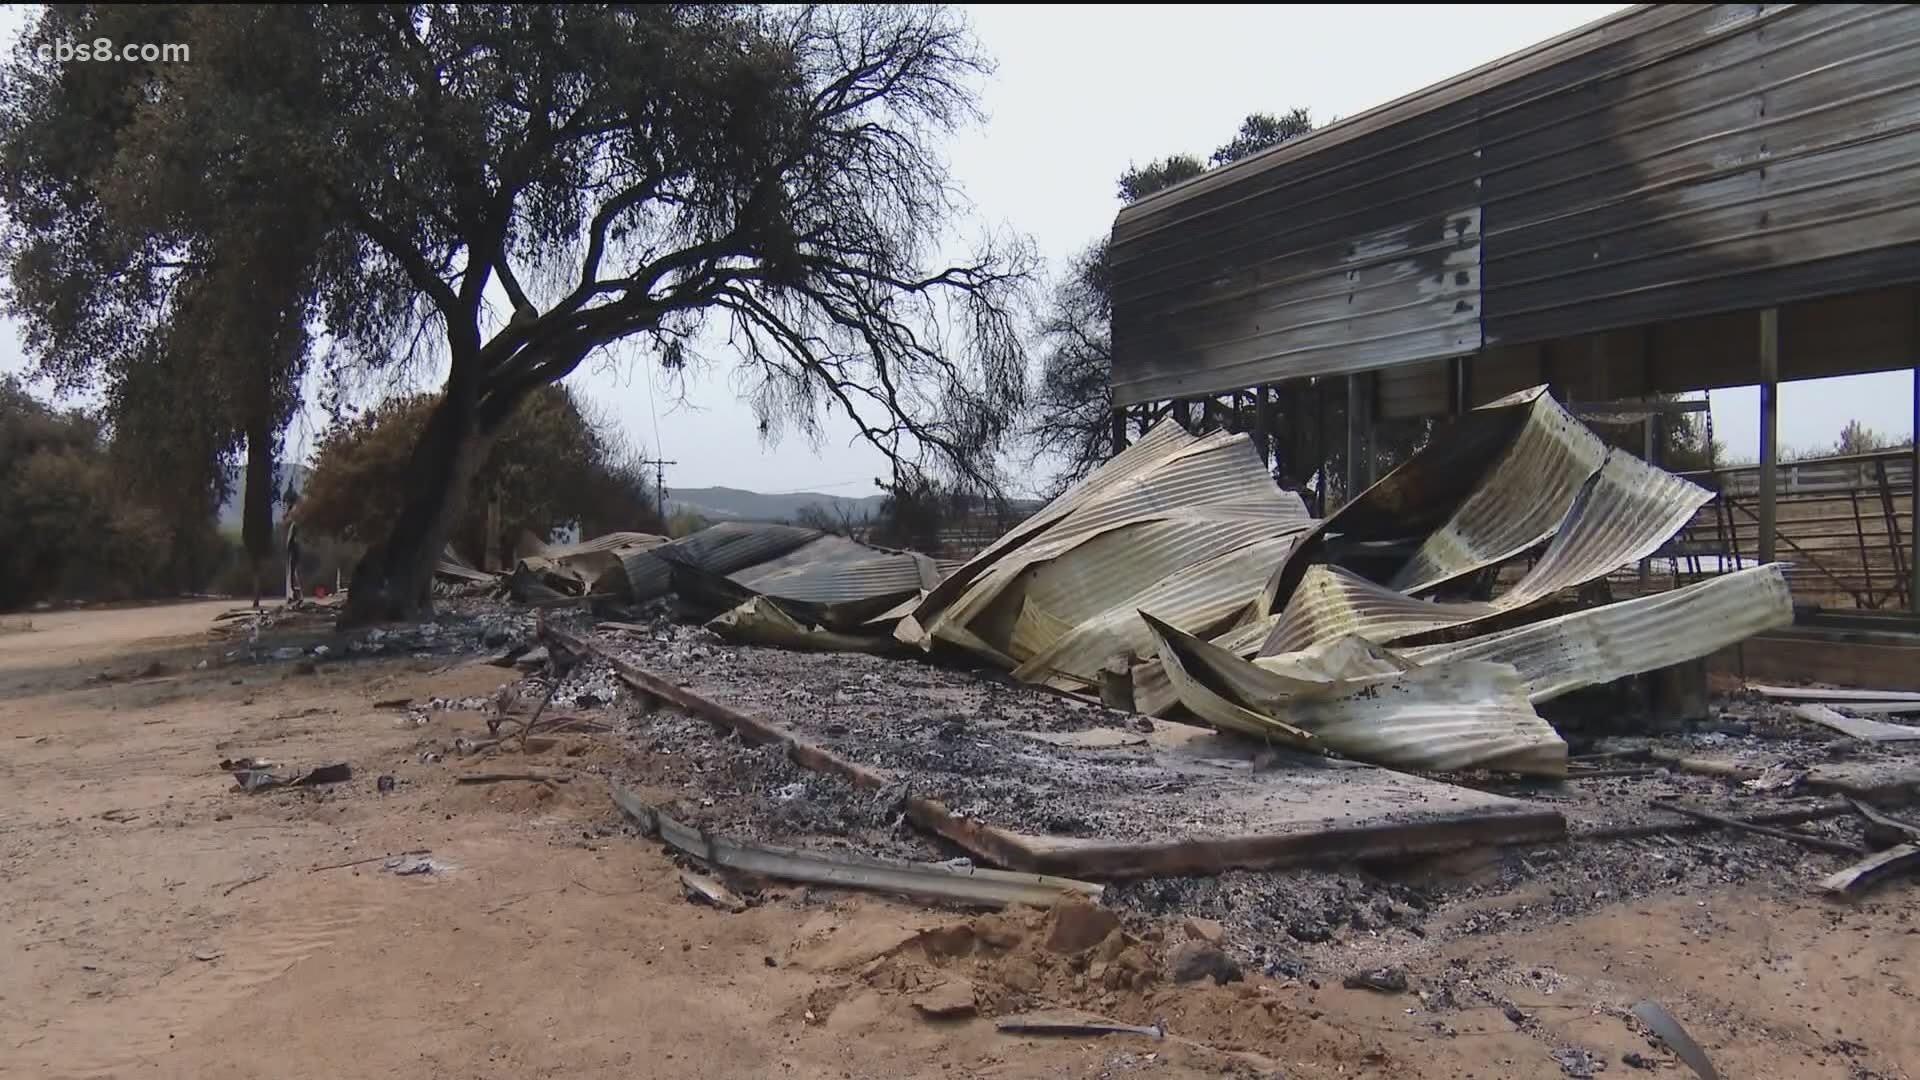 There are mounting frustrations for residents near the Valley Fire, who say if they leave their homes near the CHP checkpoints, they won't be allowed back in.